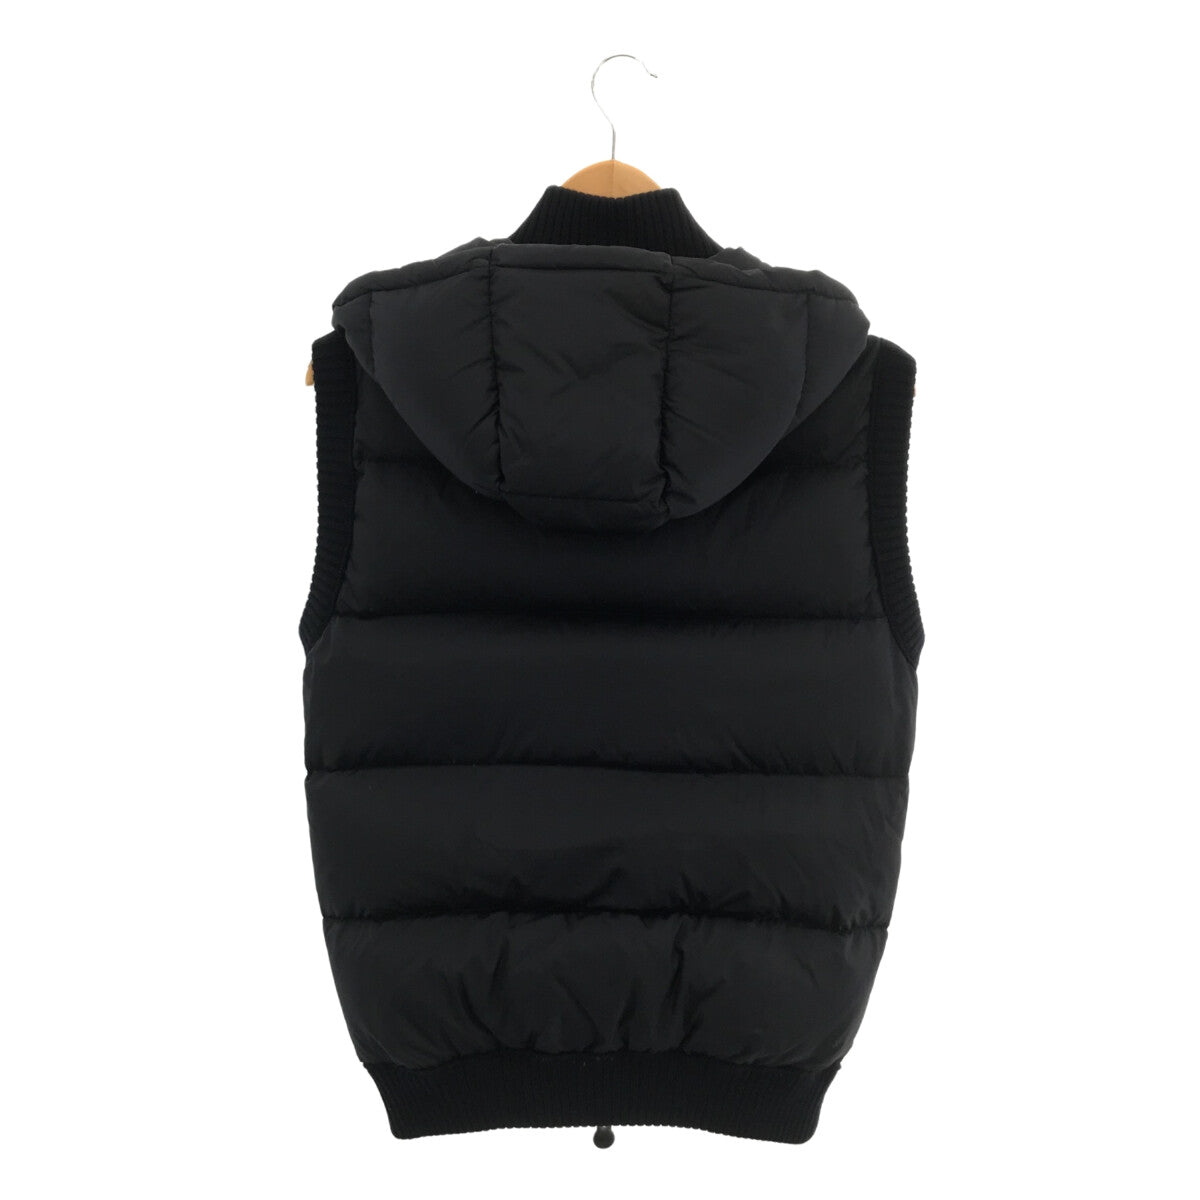 MONCLER / モンクレール | MAGLIONE TRICOT GILET ニット切替ダウン